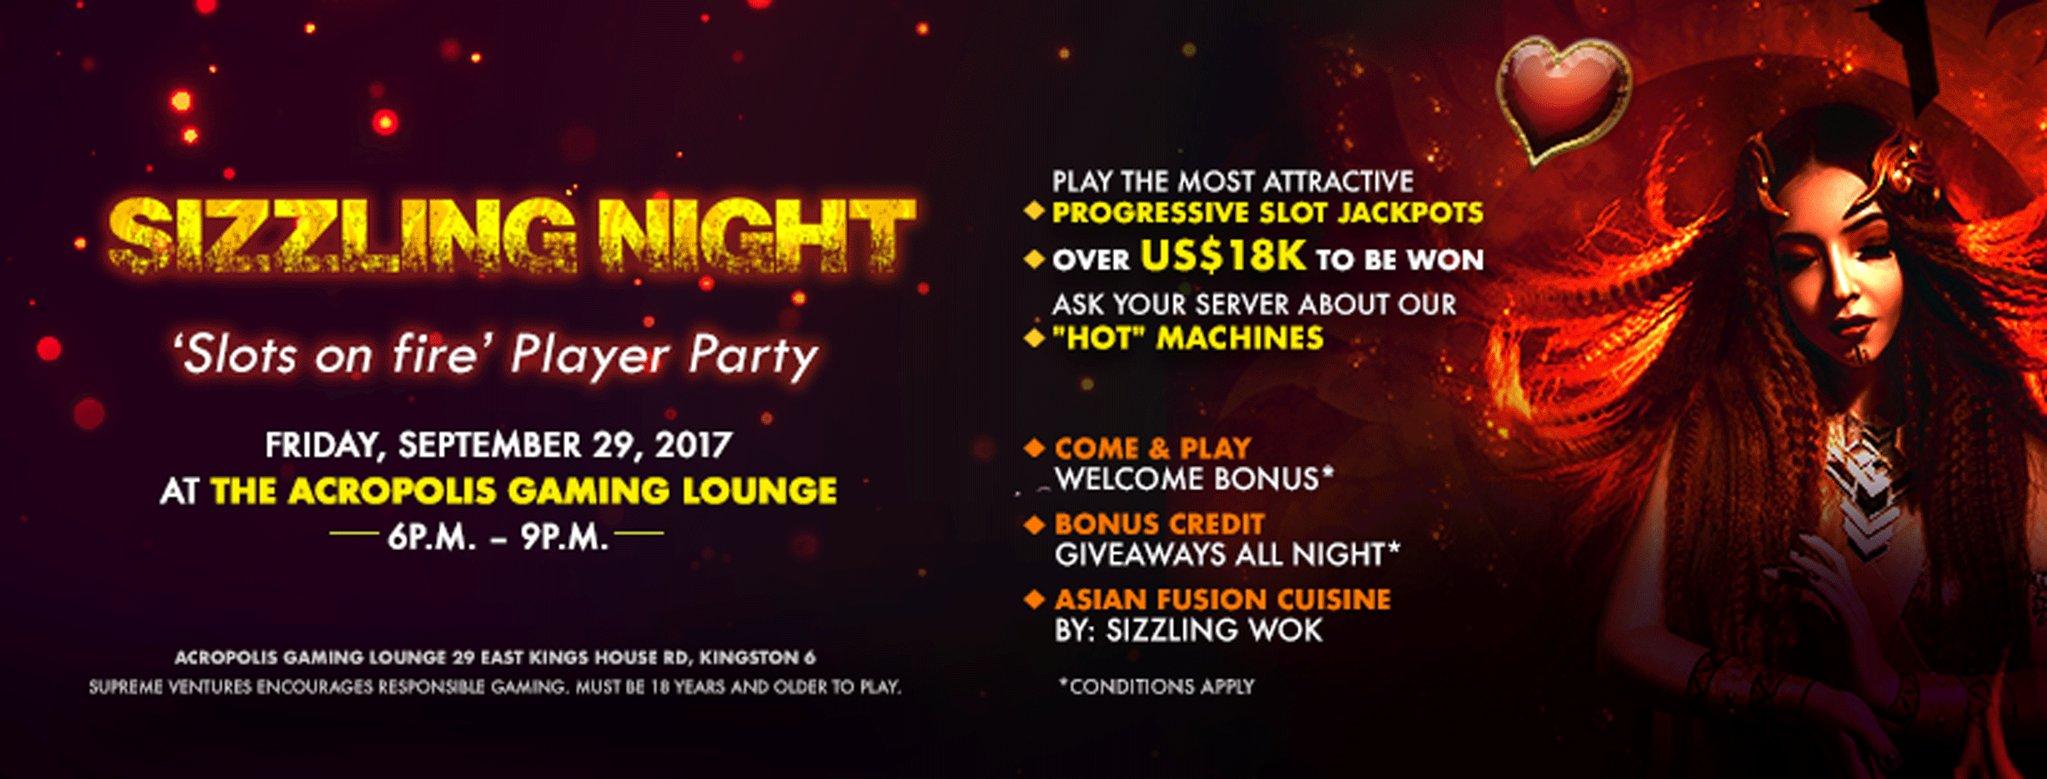 Sizzling Night 'Slots on fire' Player party